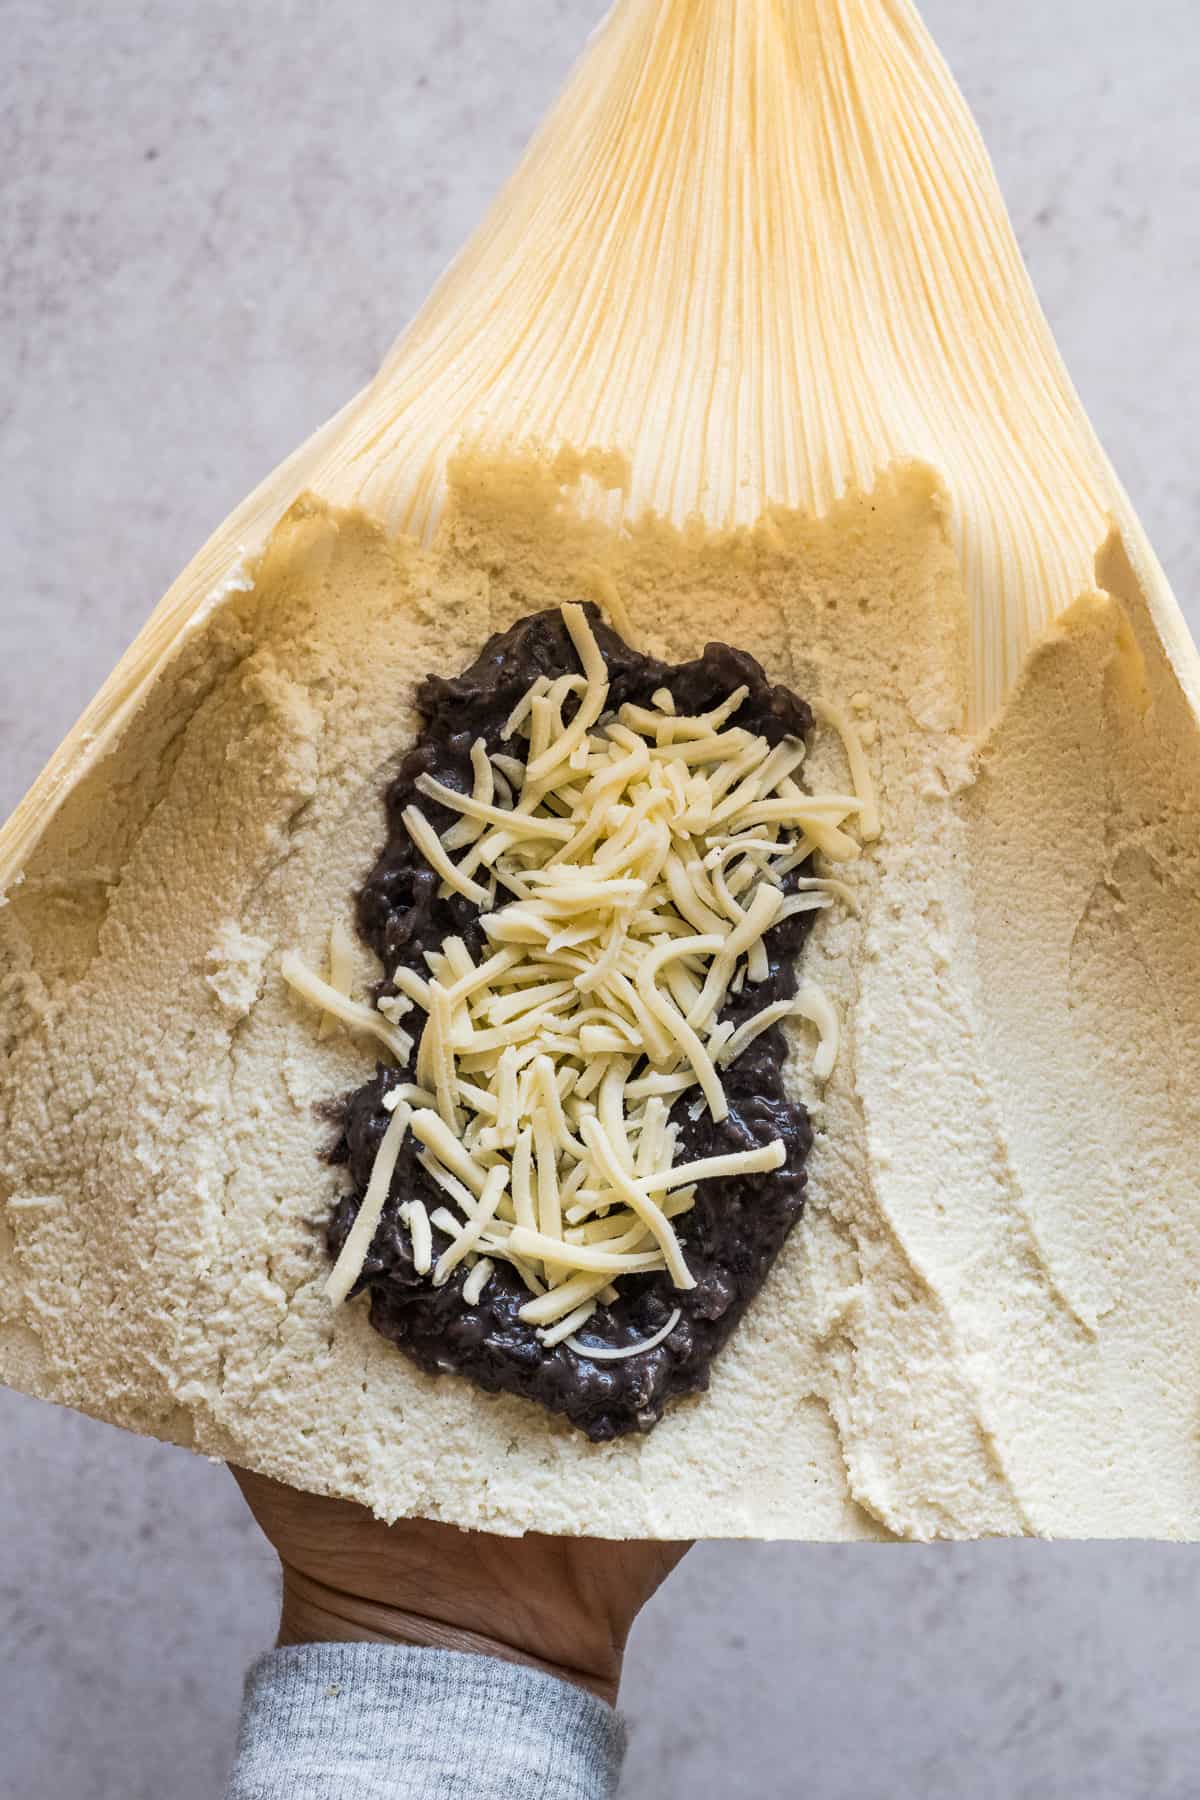 A corn husk filled with masa, refried beans, and shredded cheese.